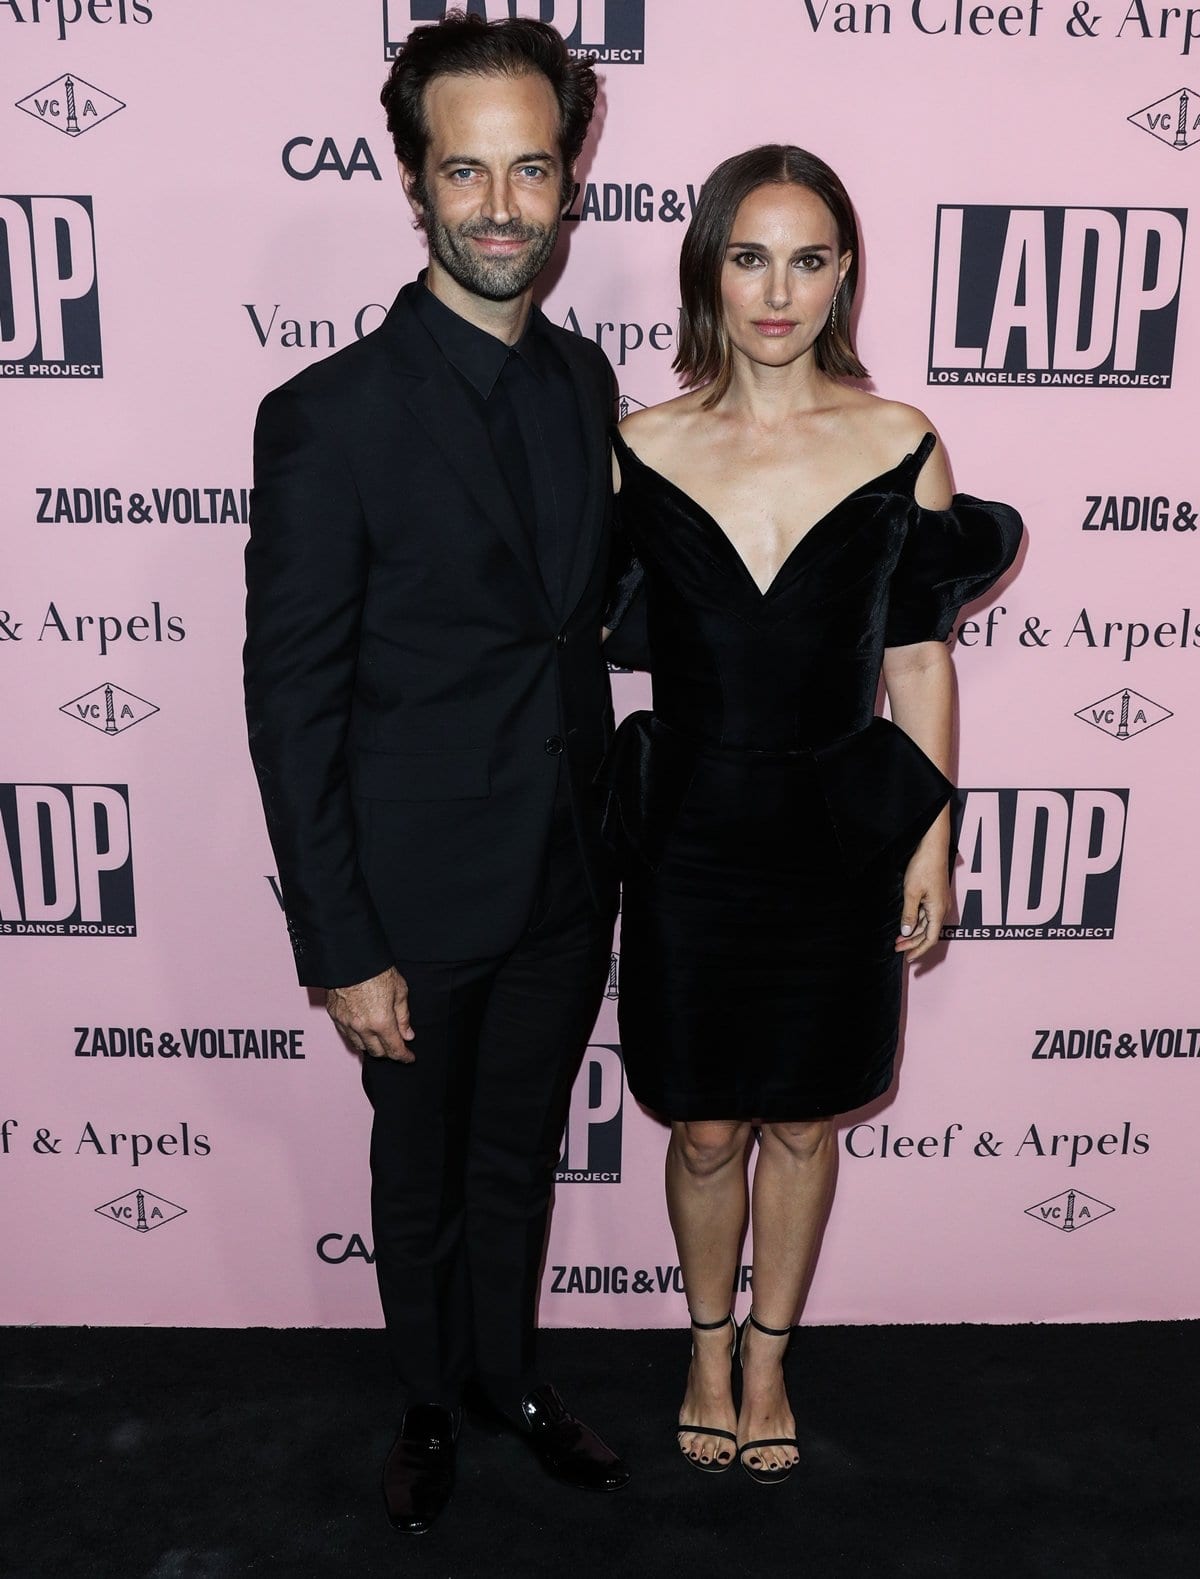 Natalie Portman and her husband Benjamin Millepied attend the Unforgettable Evening Under the Stars event